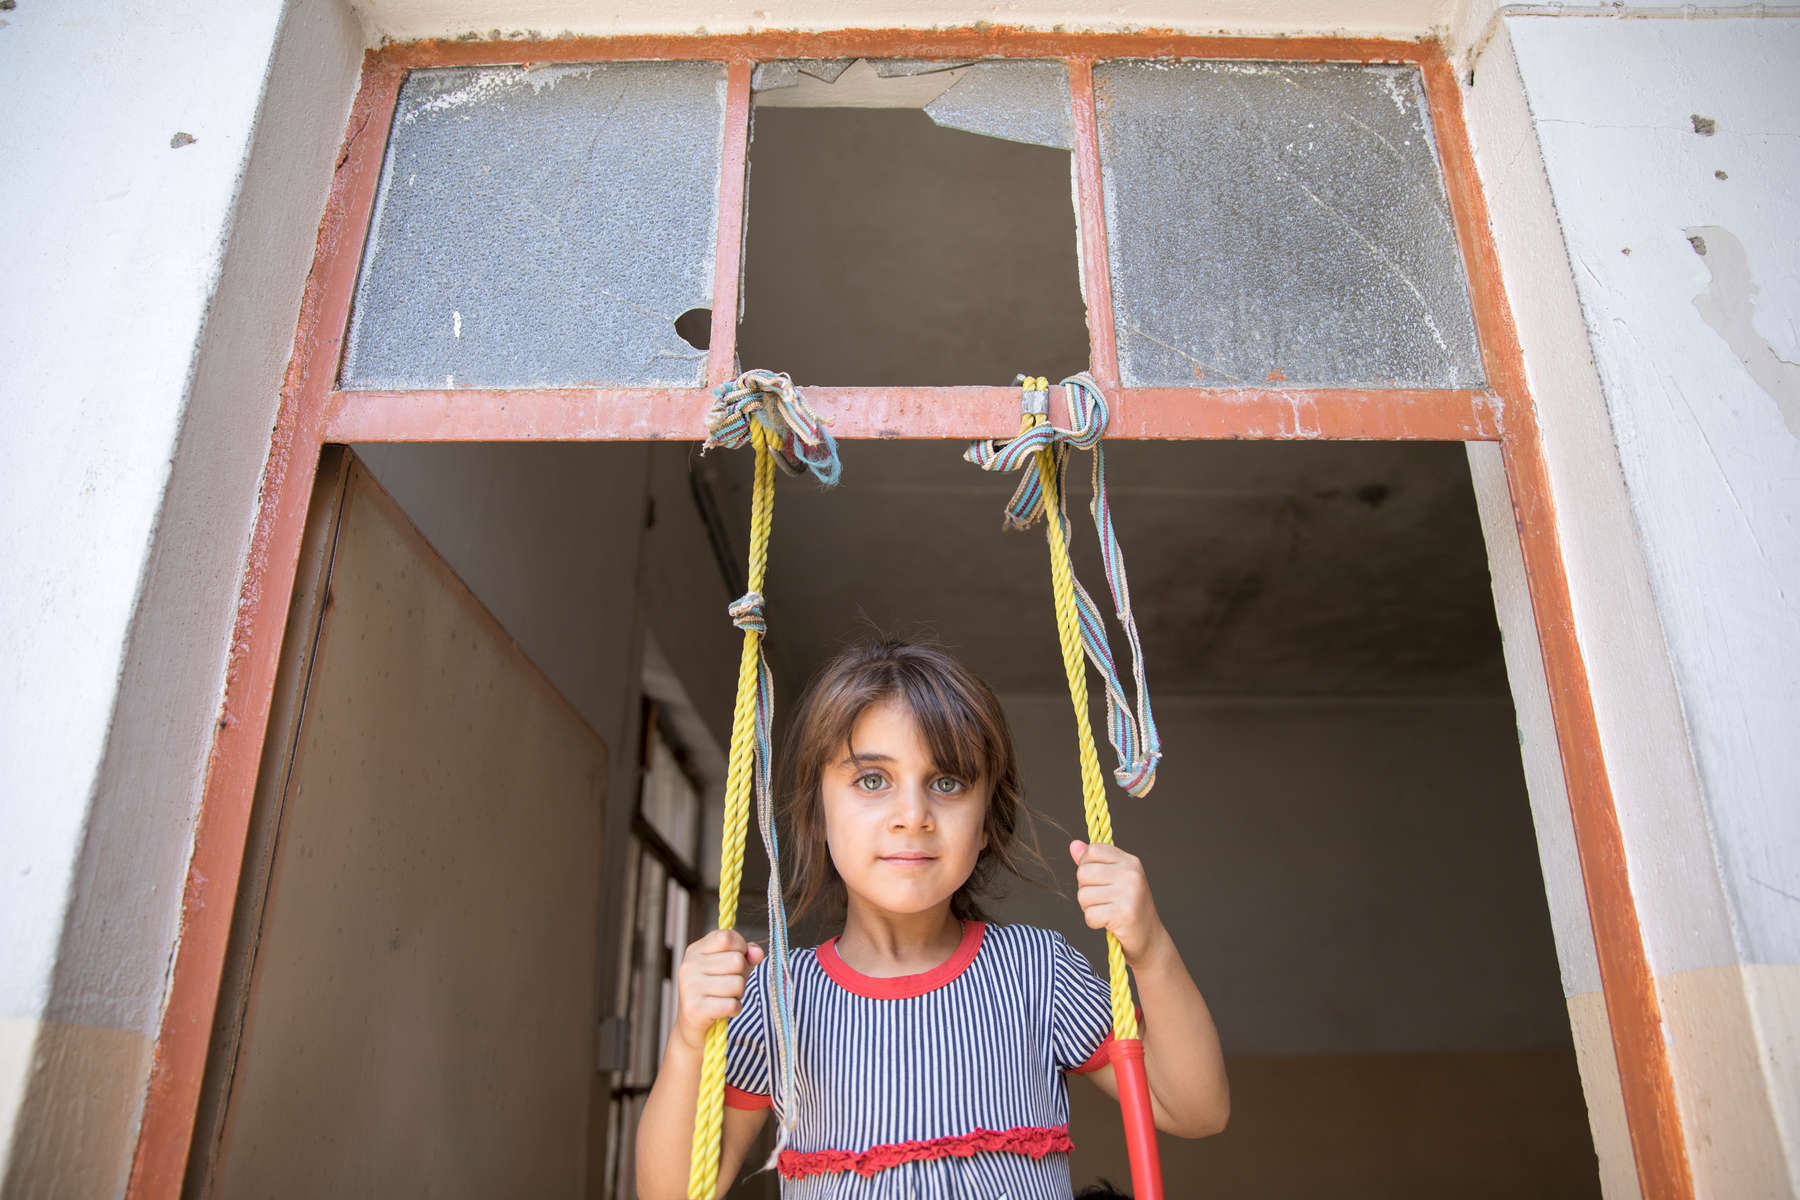 Shahad Moatez Hashem, 5, plays on an improvised swing. She lives with her grandmother, Faiza Abdulrazak Aziz. Faiza and her extended family fled from ISIS. There is nothing left at their house; their car was burned and their home was destroyed. They share a home with five families. She has six children, three boys and three girls, and six grandchildren living in the shared house.The family received a $400 cash distribution from Mercy Corps. Cash assistance is the quickest and most efficient way of helping because people can buy what they and their families need most. Since July 2016, Mercy Corps has helped more than 12,000 families impacted by conflict around Mosul.